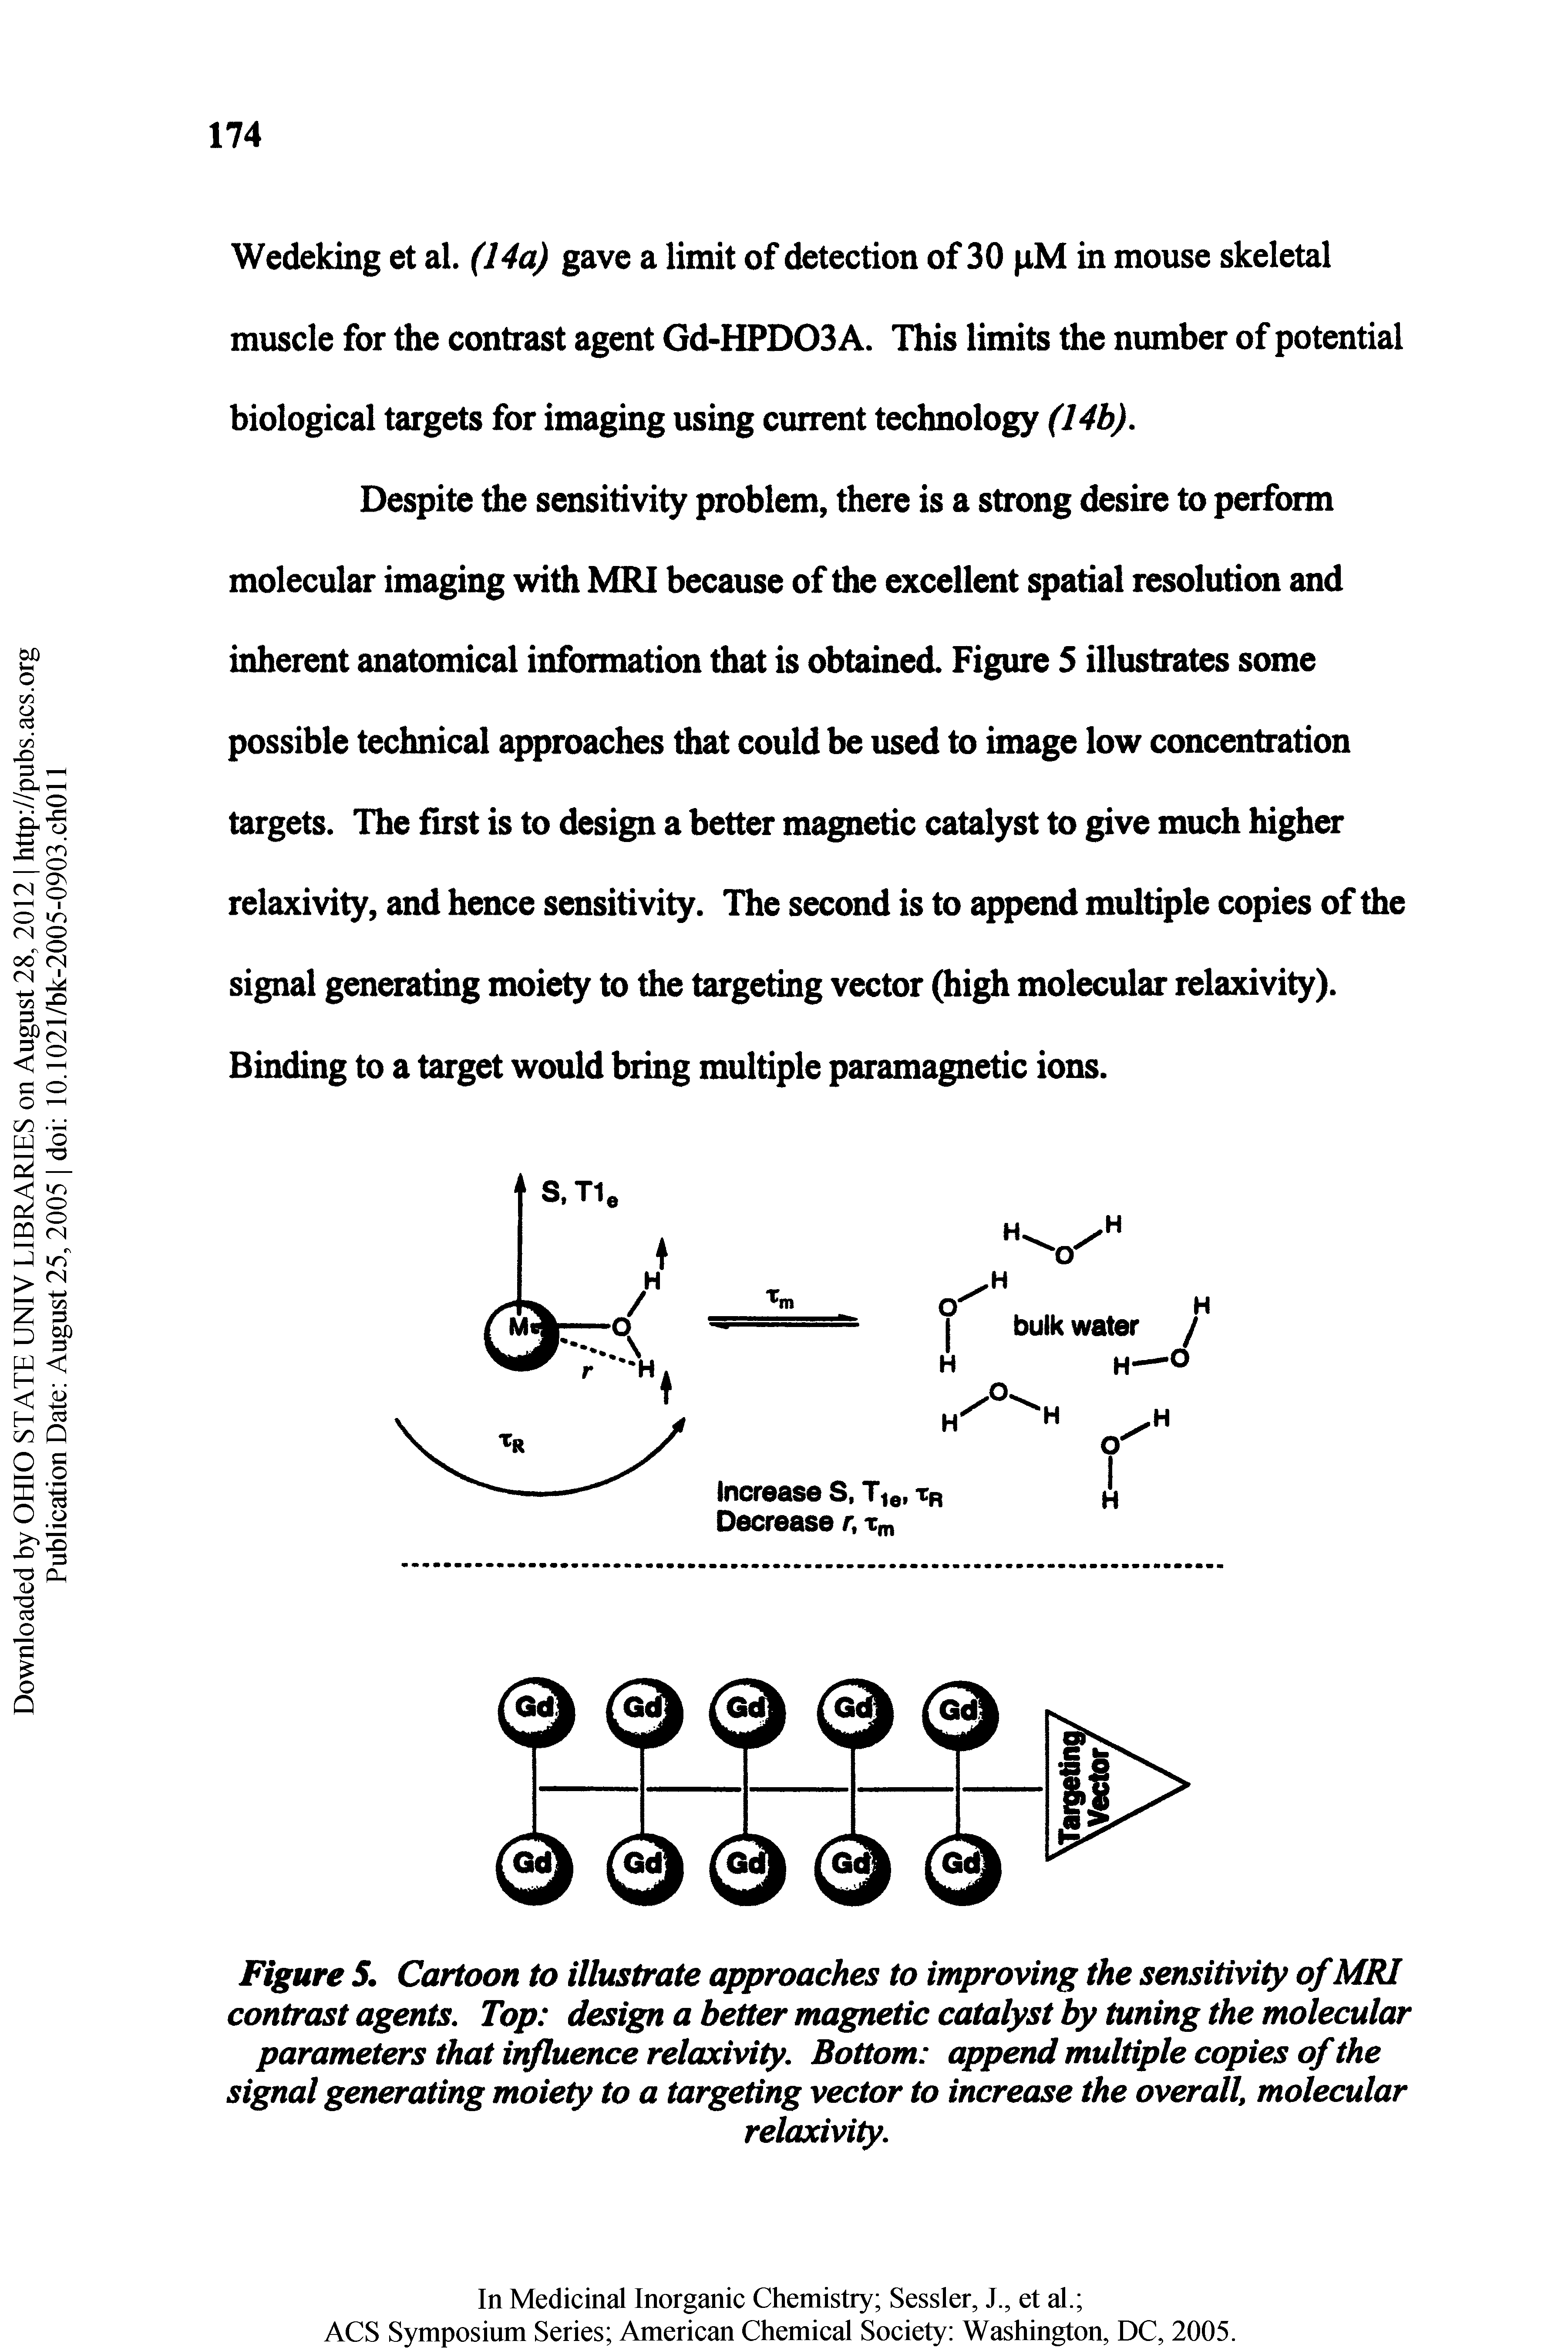 Figure 5. Cartoon to illustrate approaches to improving the sensitivity of MRI contrast agents. Top design a better magnetic catalyst by tuning the molecular parameters that influence relaxivity. Bottom append multiple copies of the signal generating moiety to a targeting vector to increase the overall, molecular...